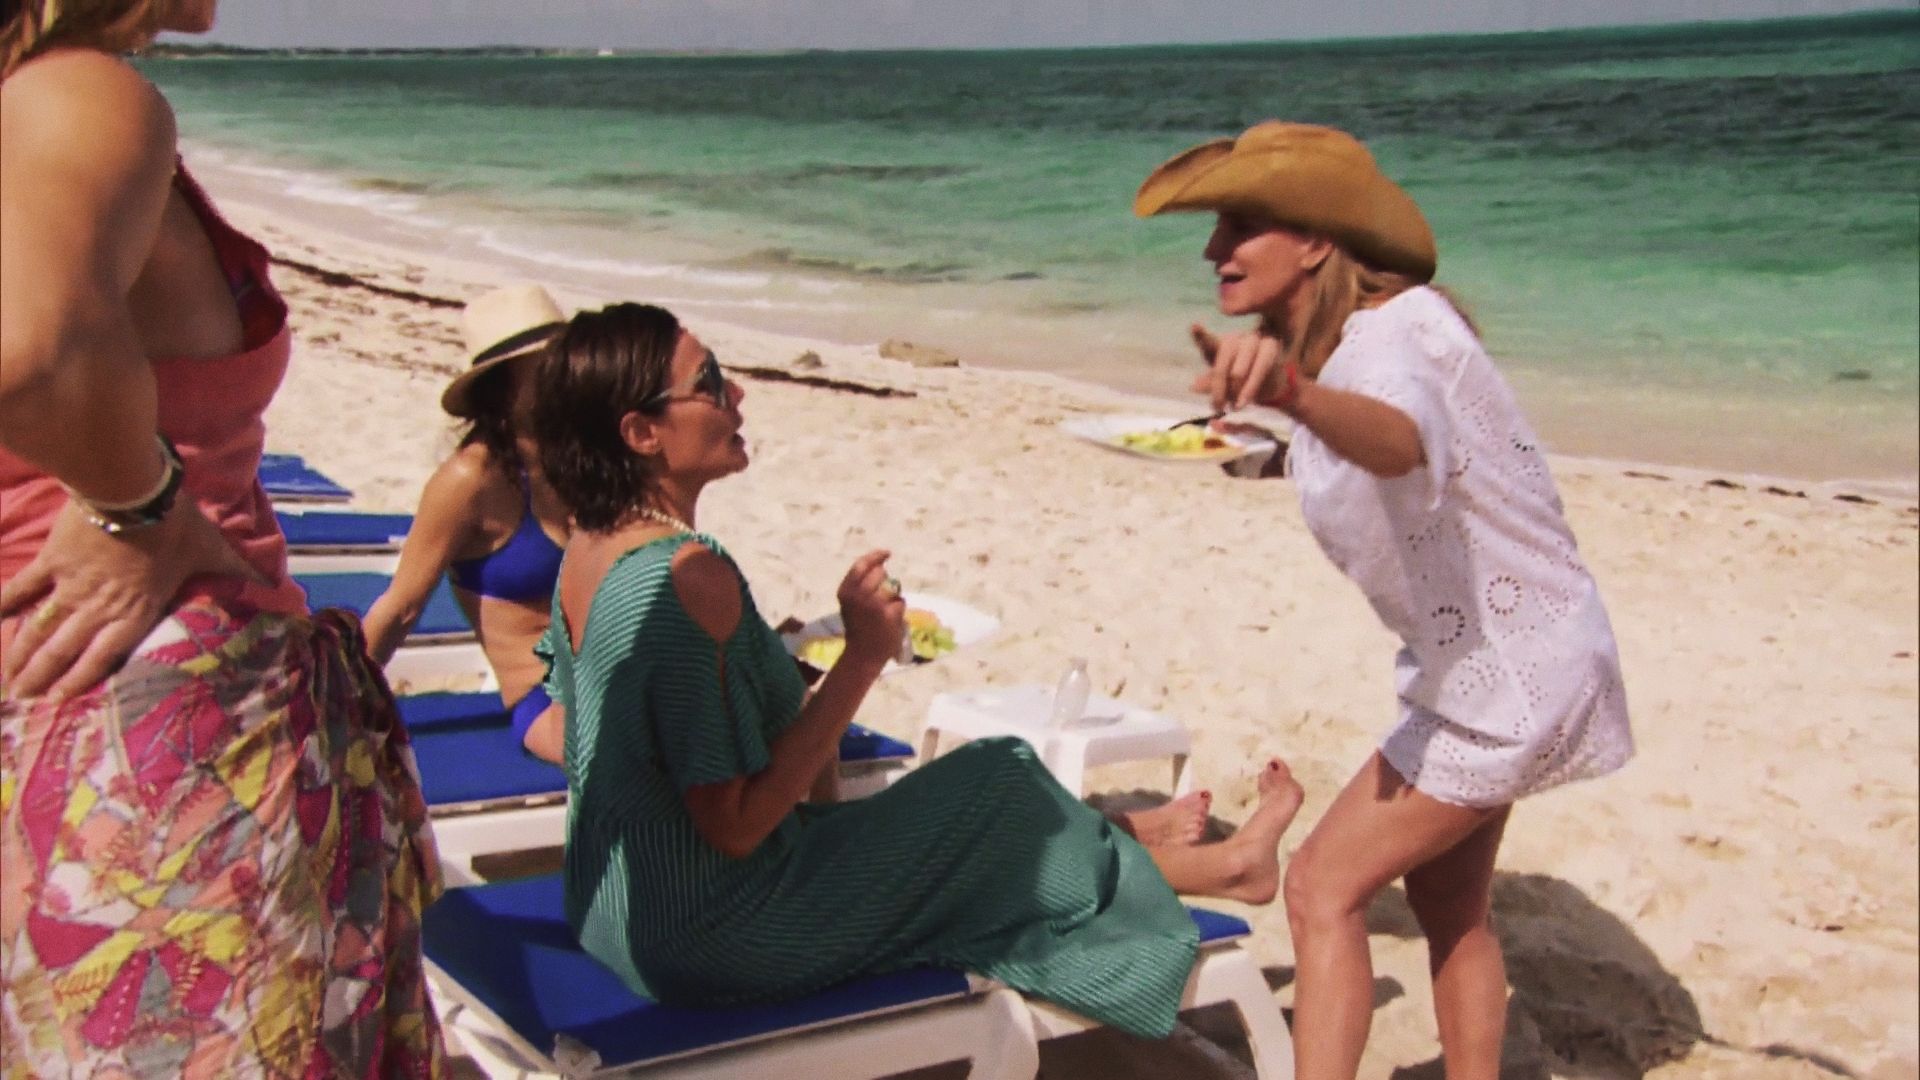 RHONY The Real Housewives of New York City S07E13 saison 7 épisode 13 Sonja contre-attaque